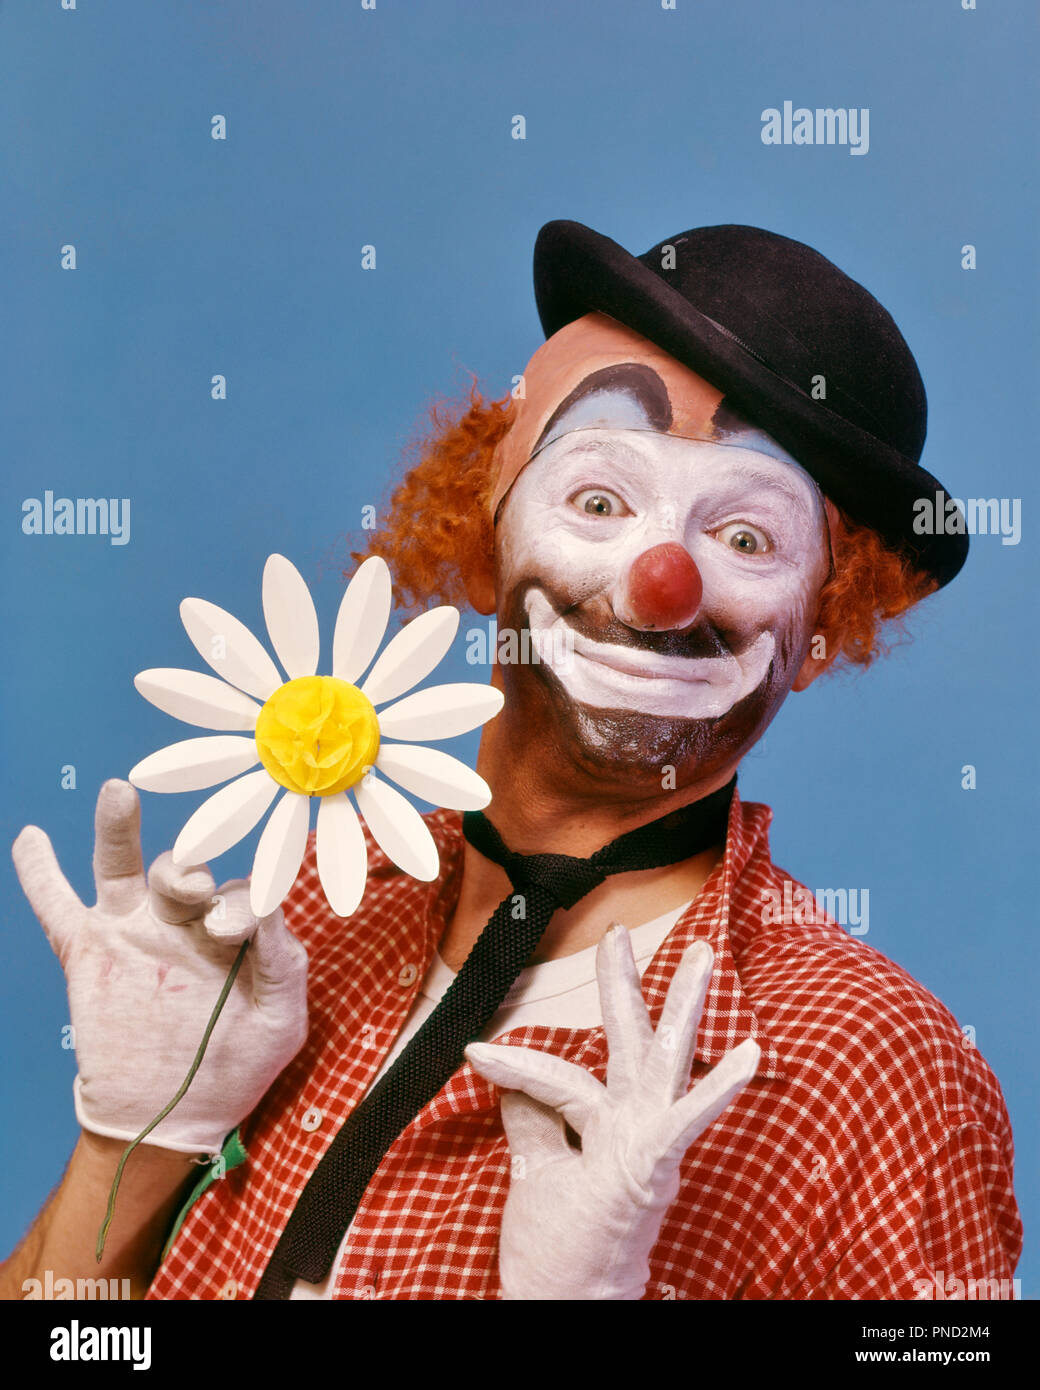 1970s SMILING WIDE-EYED WHITE FACE HOBO CLOWN WITH RED NOSE LOOKING AT CAMERA WEARING A DERBY HAT AND HOLDING A PAPER DAISY  - kc5321 PHT001 HARS HALF-LENGTH INSPIRATION TRADITIONAL ENTERTAINMENT CONFIDENCE EXPRESSIONS DAISY EYE CONTACT SUCCESS PERFORMING ARTS SKILL BUG-EYED OCCUPATION HAPPINESS SKILLS WEIRD CHEERFUL DERBY AND EXCITEMENT ZANY UNCONVENTIONAL A OCCUPATIONS SMILES RED HAIR JOYFUL STYLISH IDIOSYNCRATIC HOBO WIDE-EYED AMUSING ECCENTRIC MID-ADULT MID-ADULT MAN WHITE FACE YOUNG ADULT MAN CAUCASIAN ETHNICITY ERRATIC OLD FASHIONED RED NOSE Stock Photo